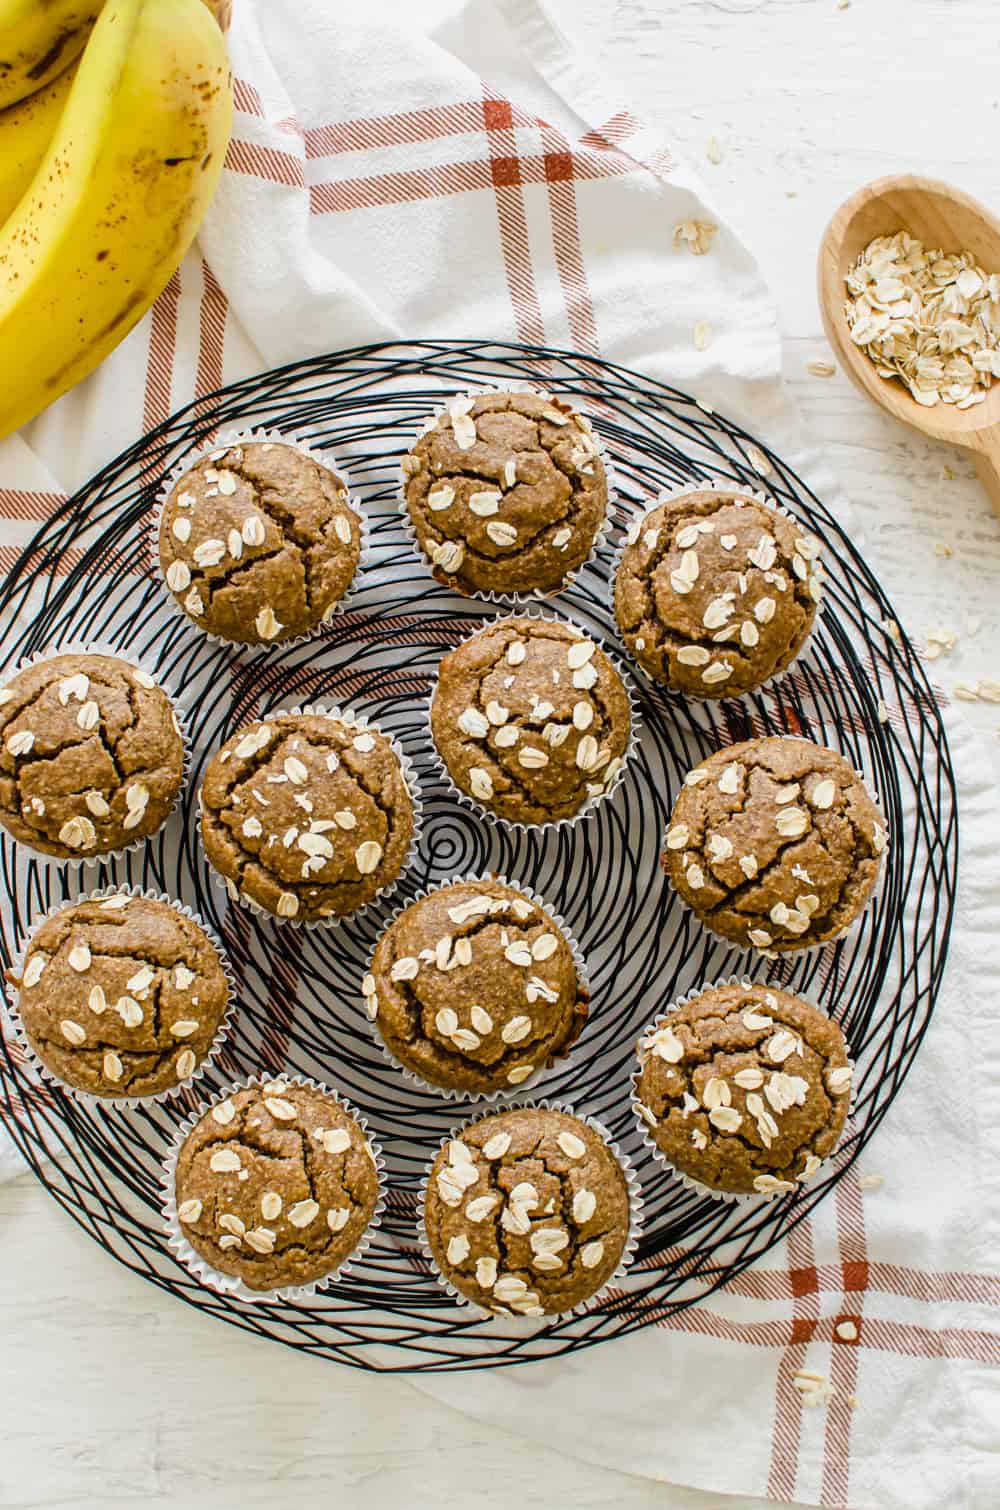 Gluten-free banana muffins with oats on top lined up on a wire serving tray.